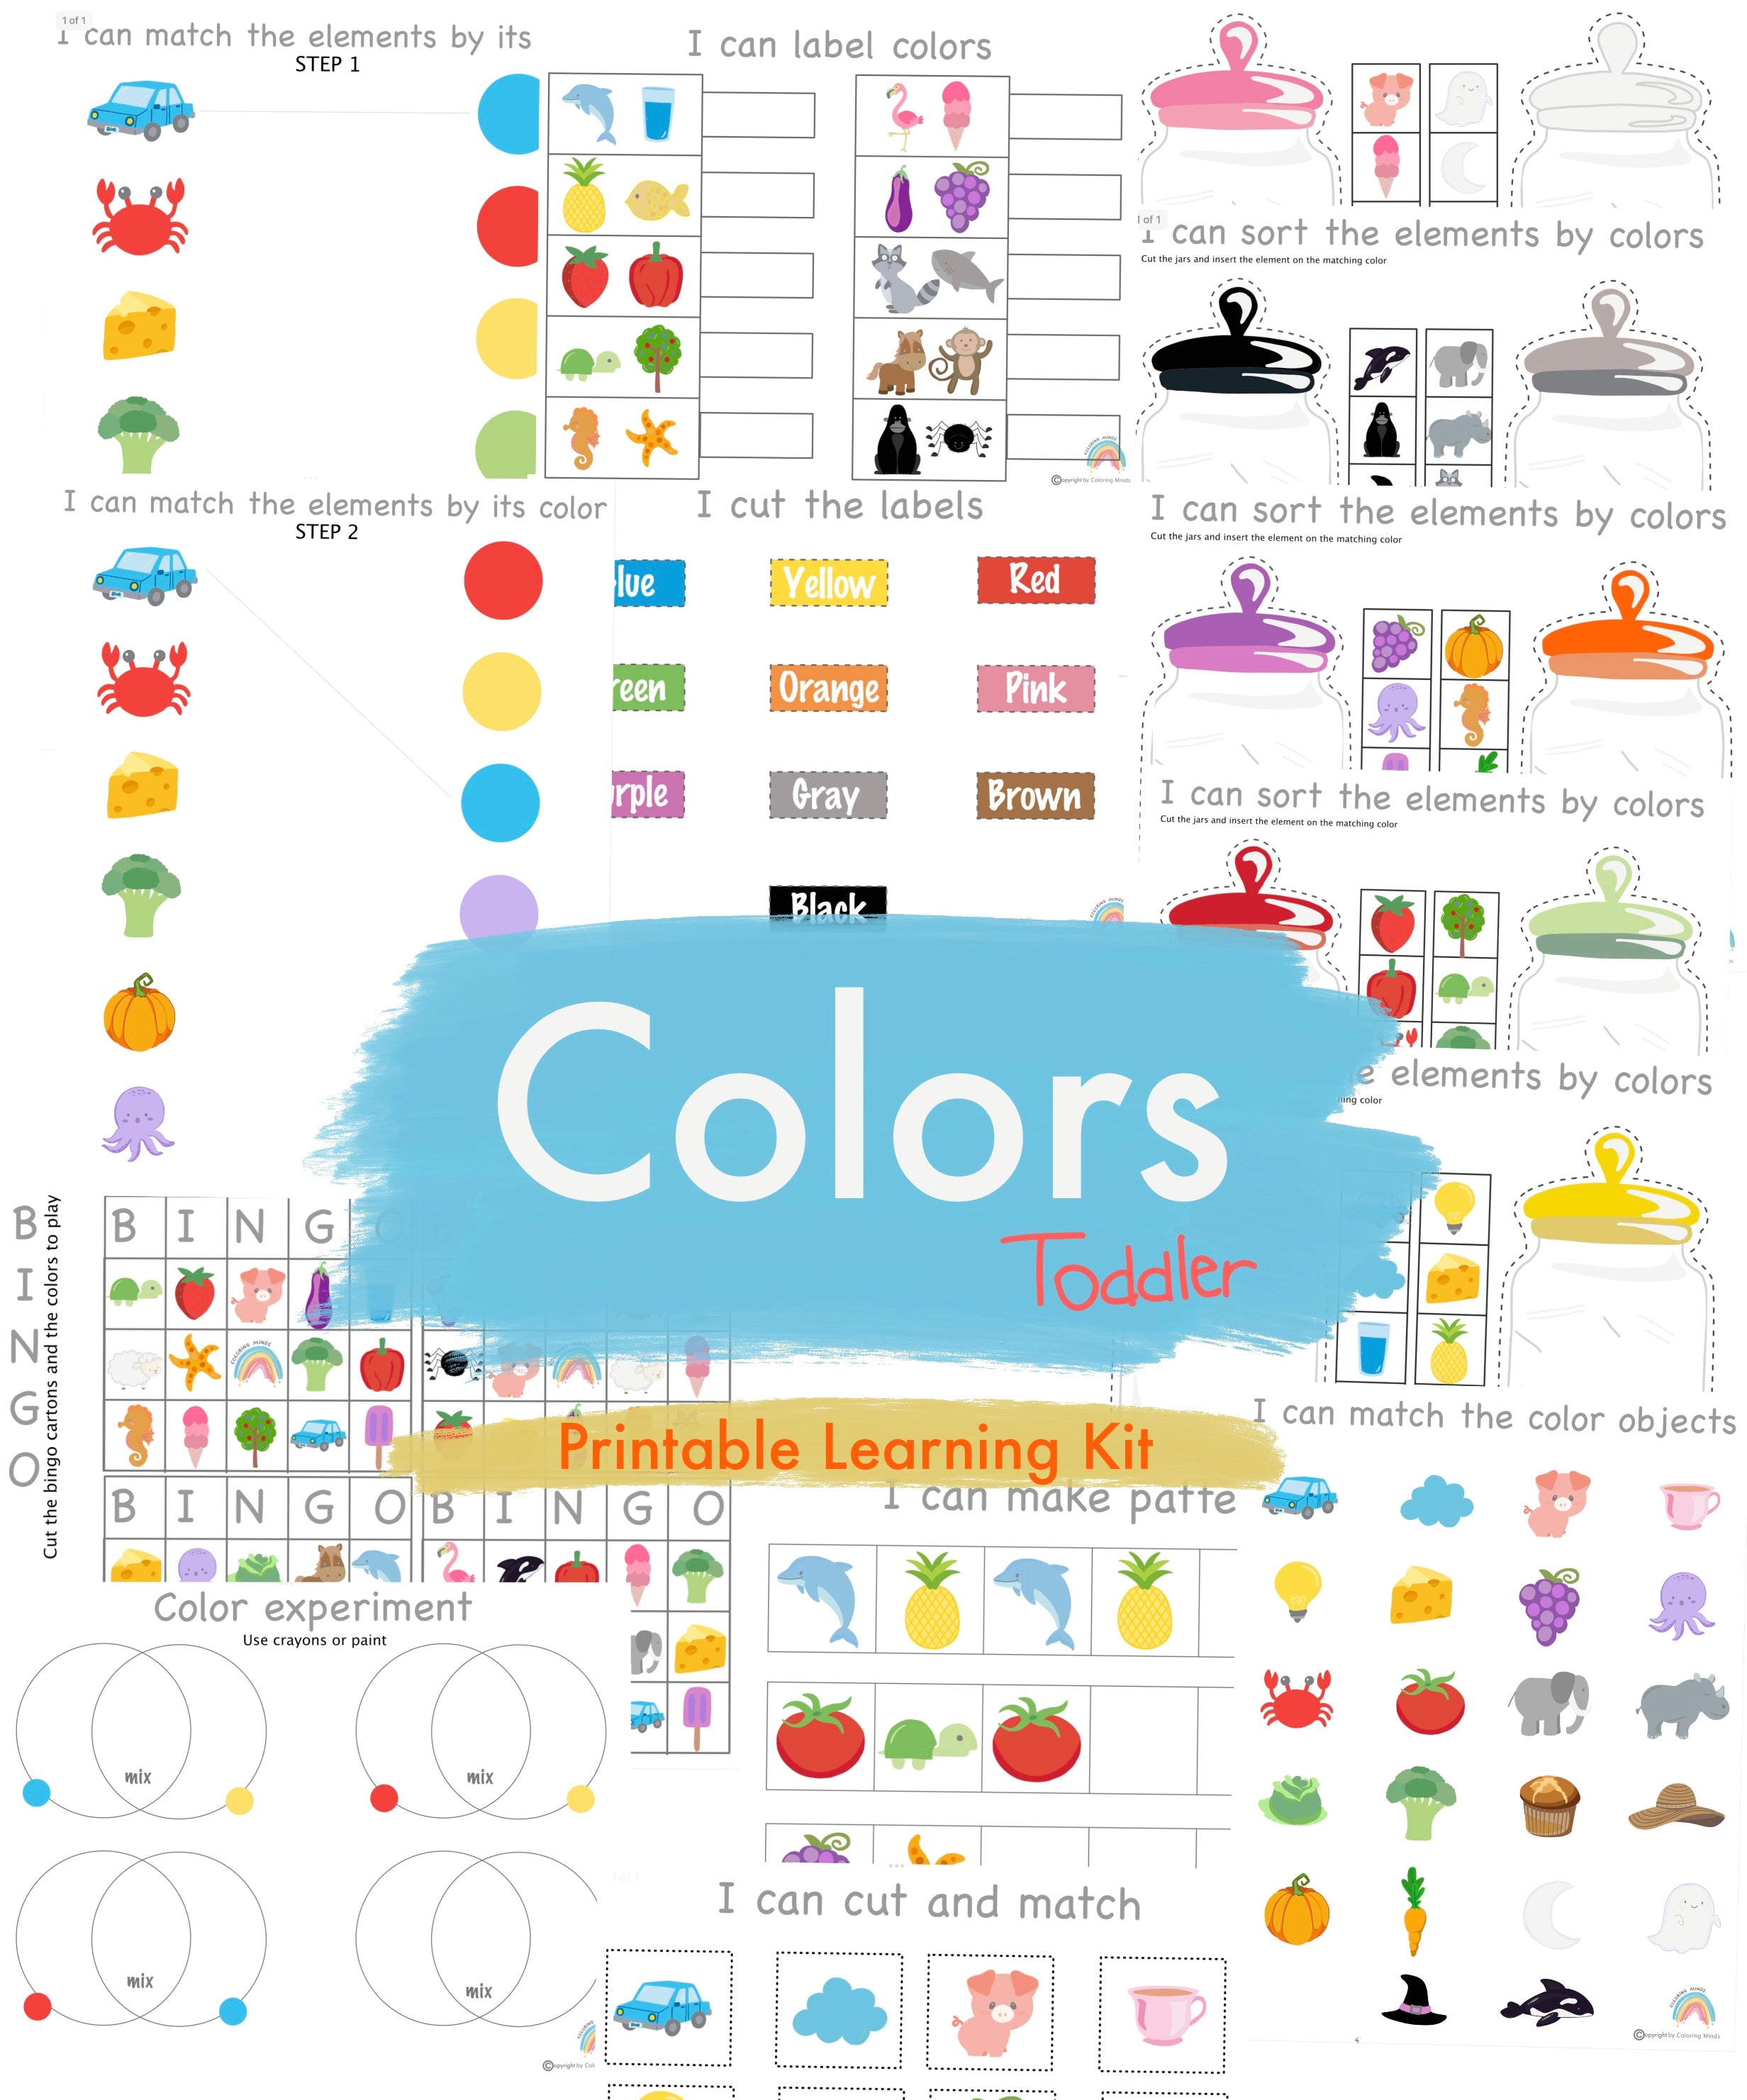 Colorations The Art of Learning- All About Me Activity Kit